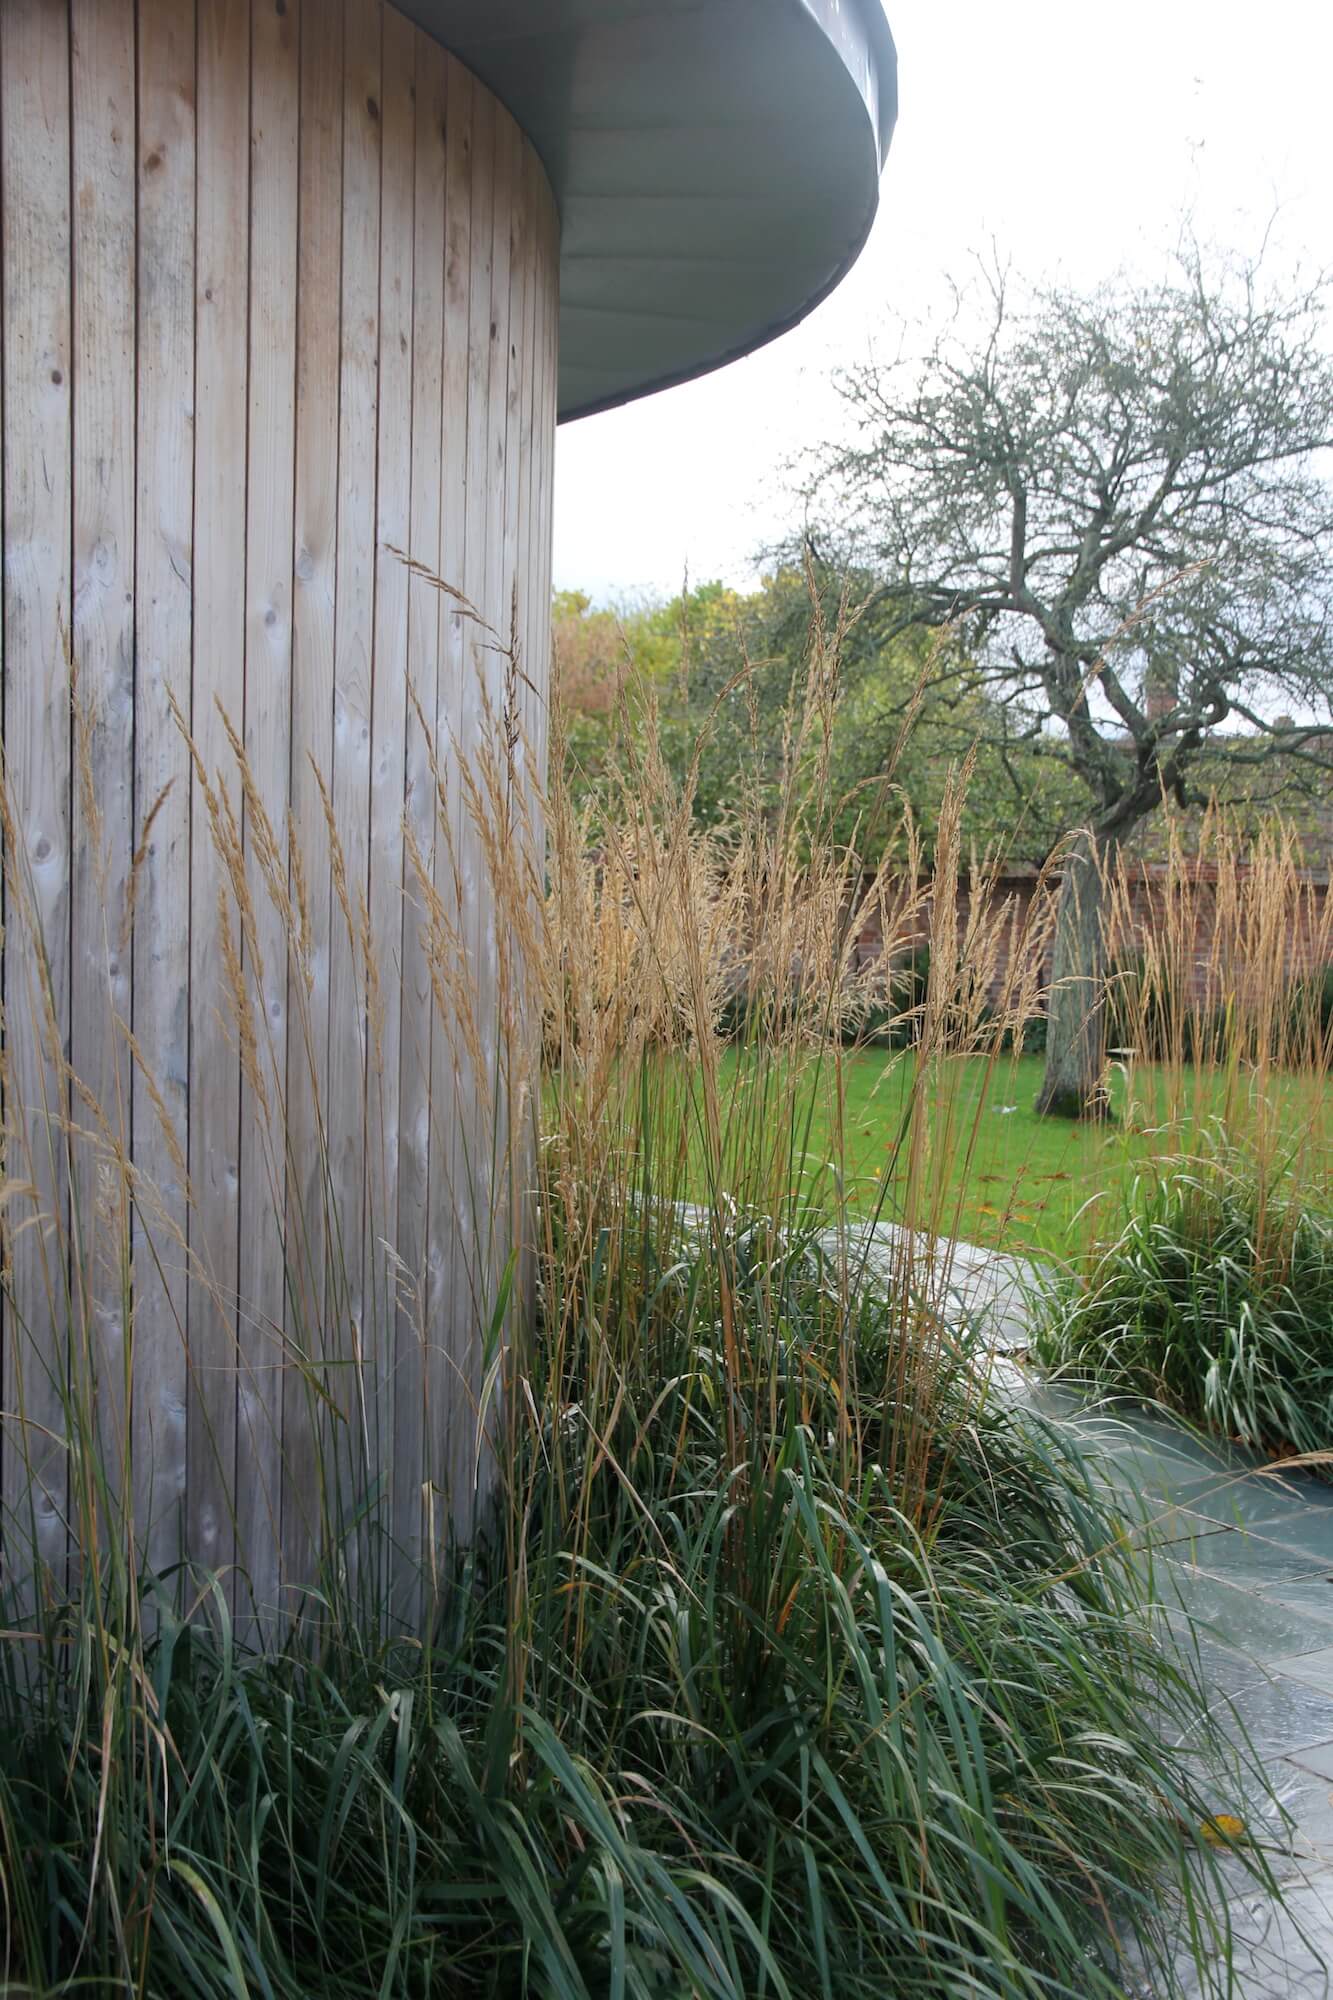 Grasses growing at the edge of wood cladded garden studio